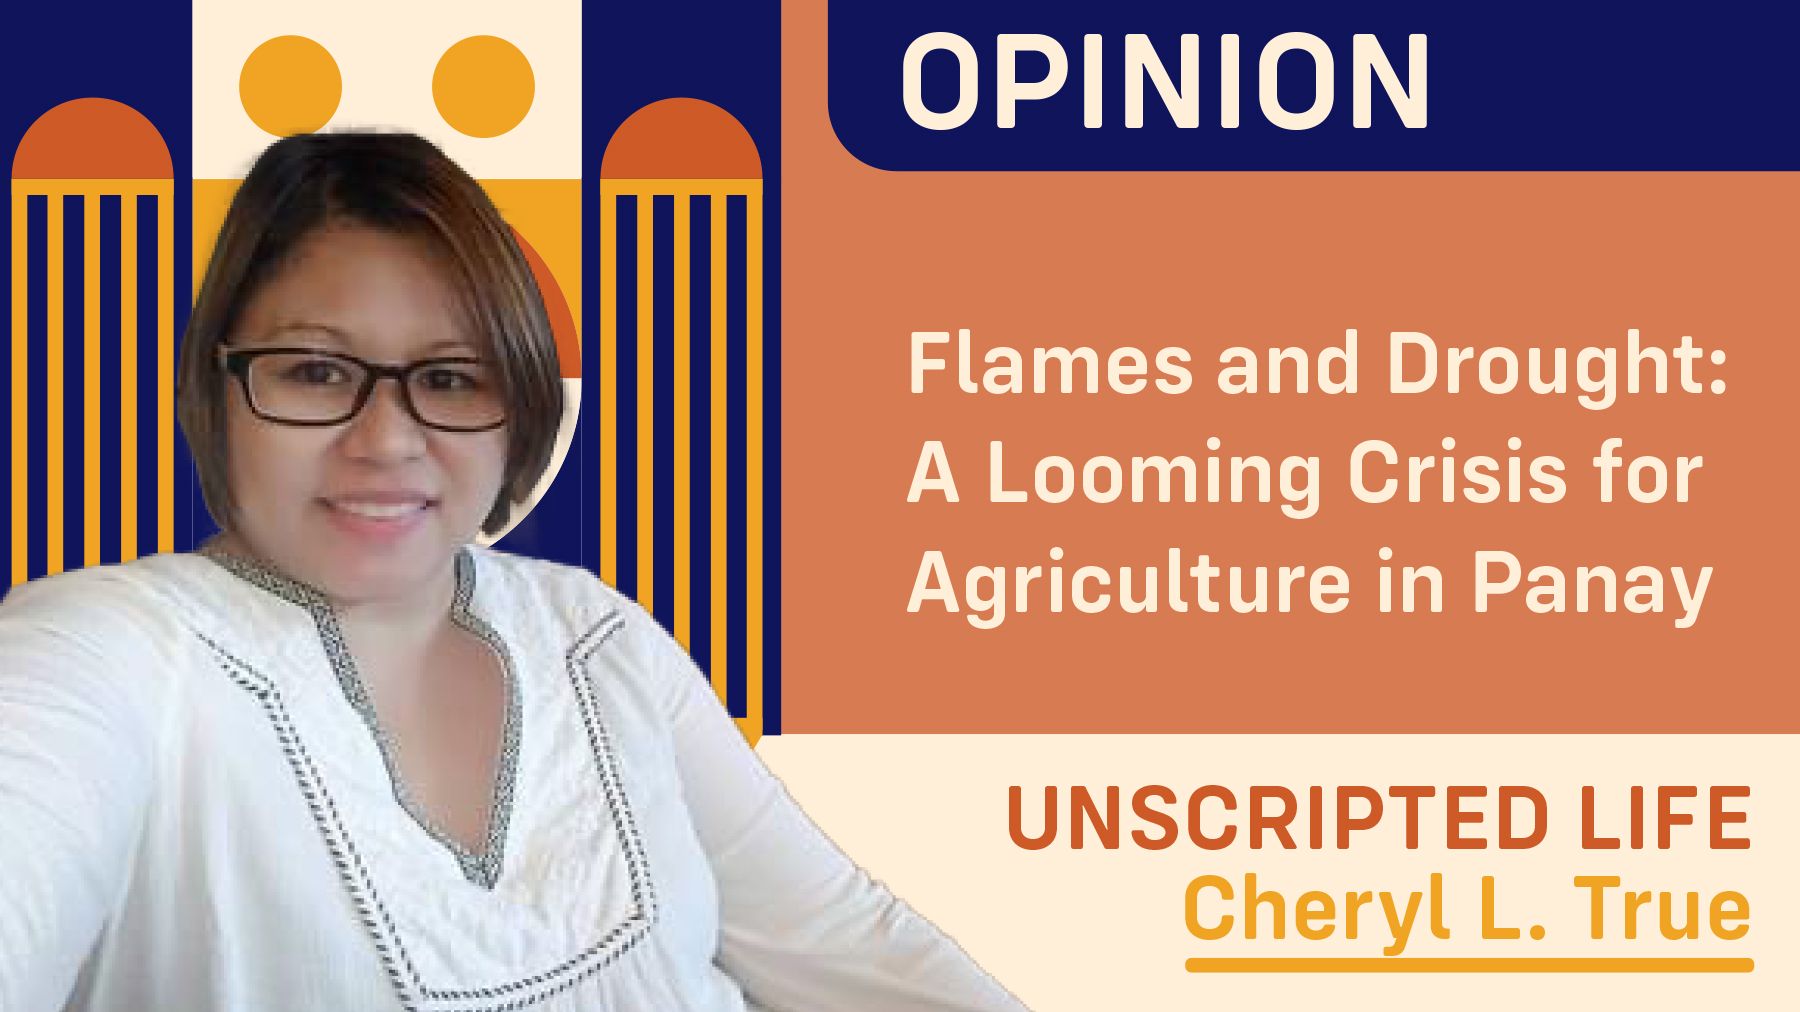 Flames and Drought: A Looming Crisis for Agriculture in Panay